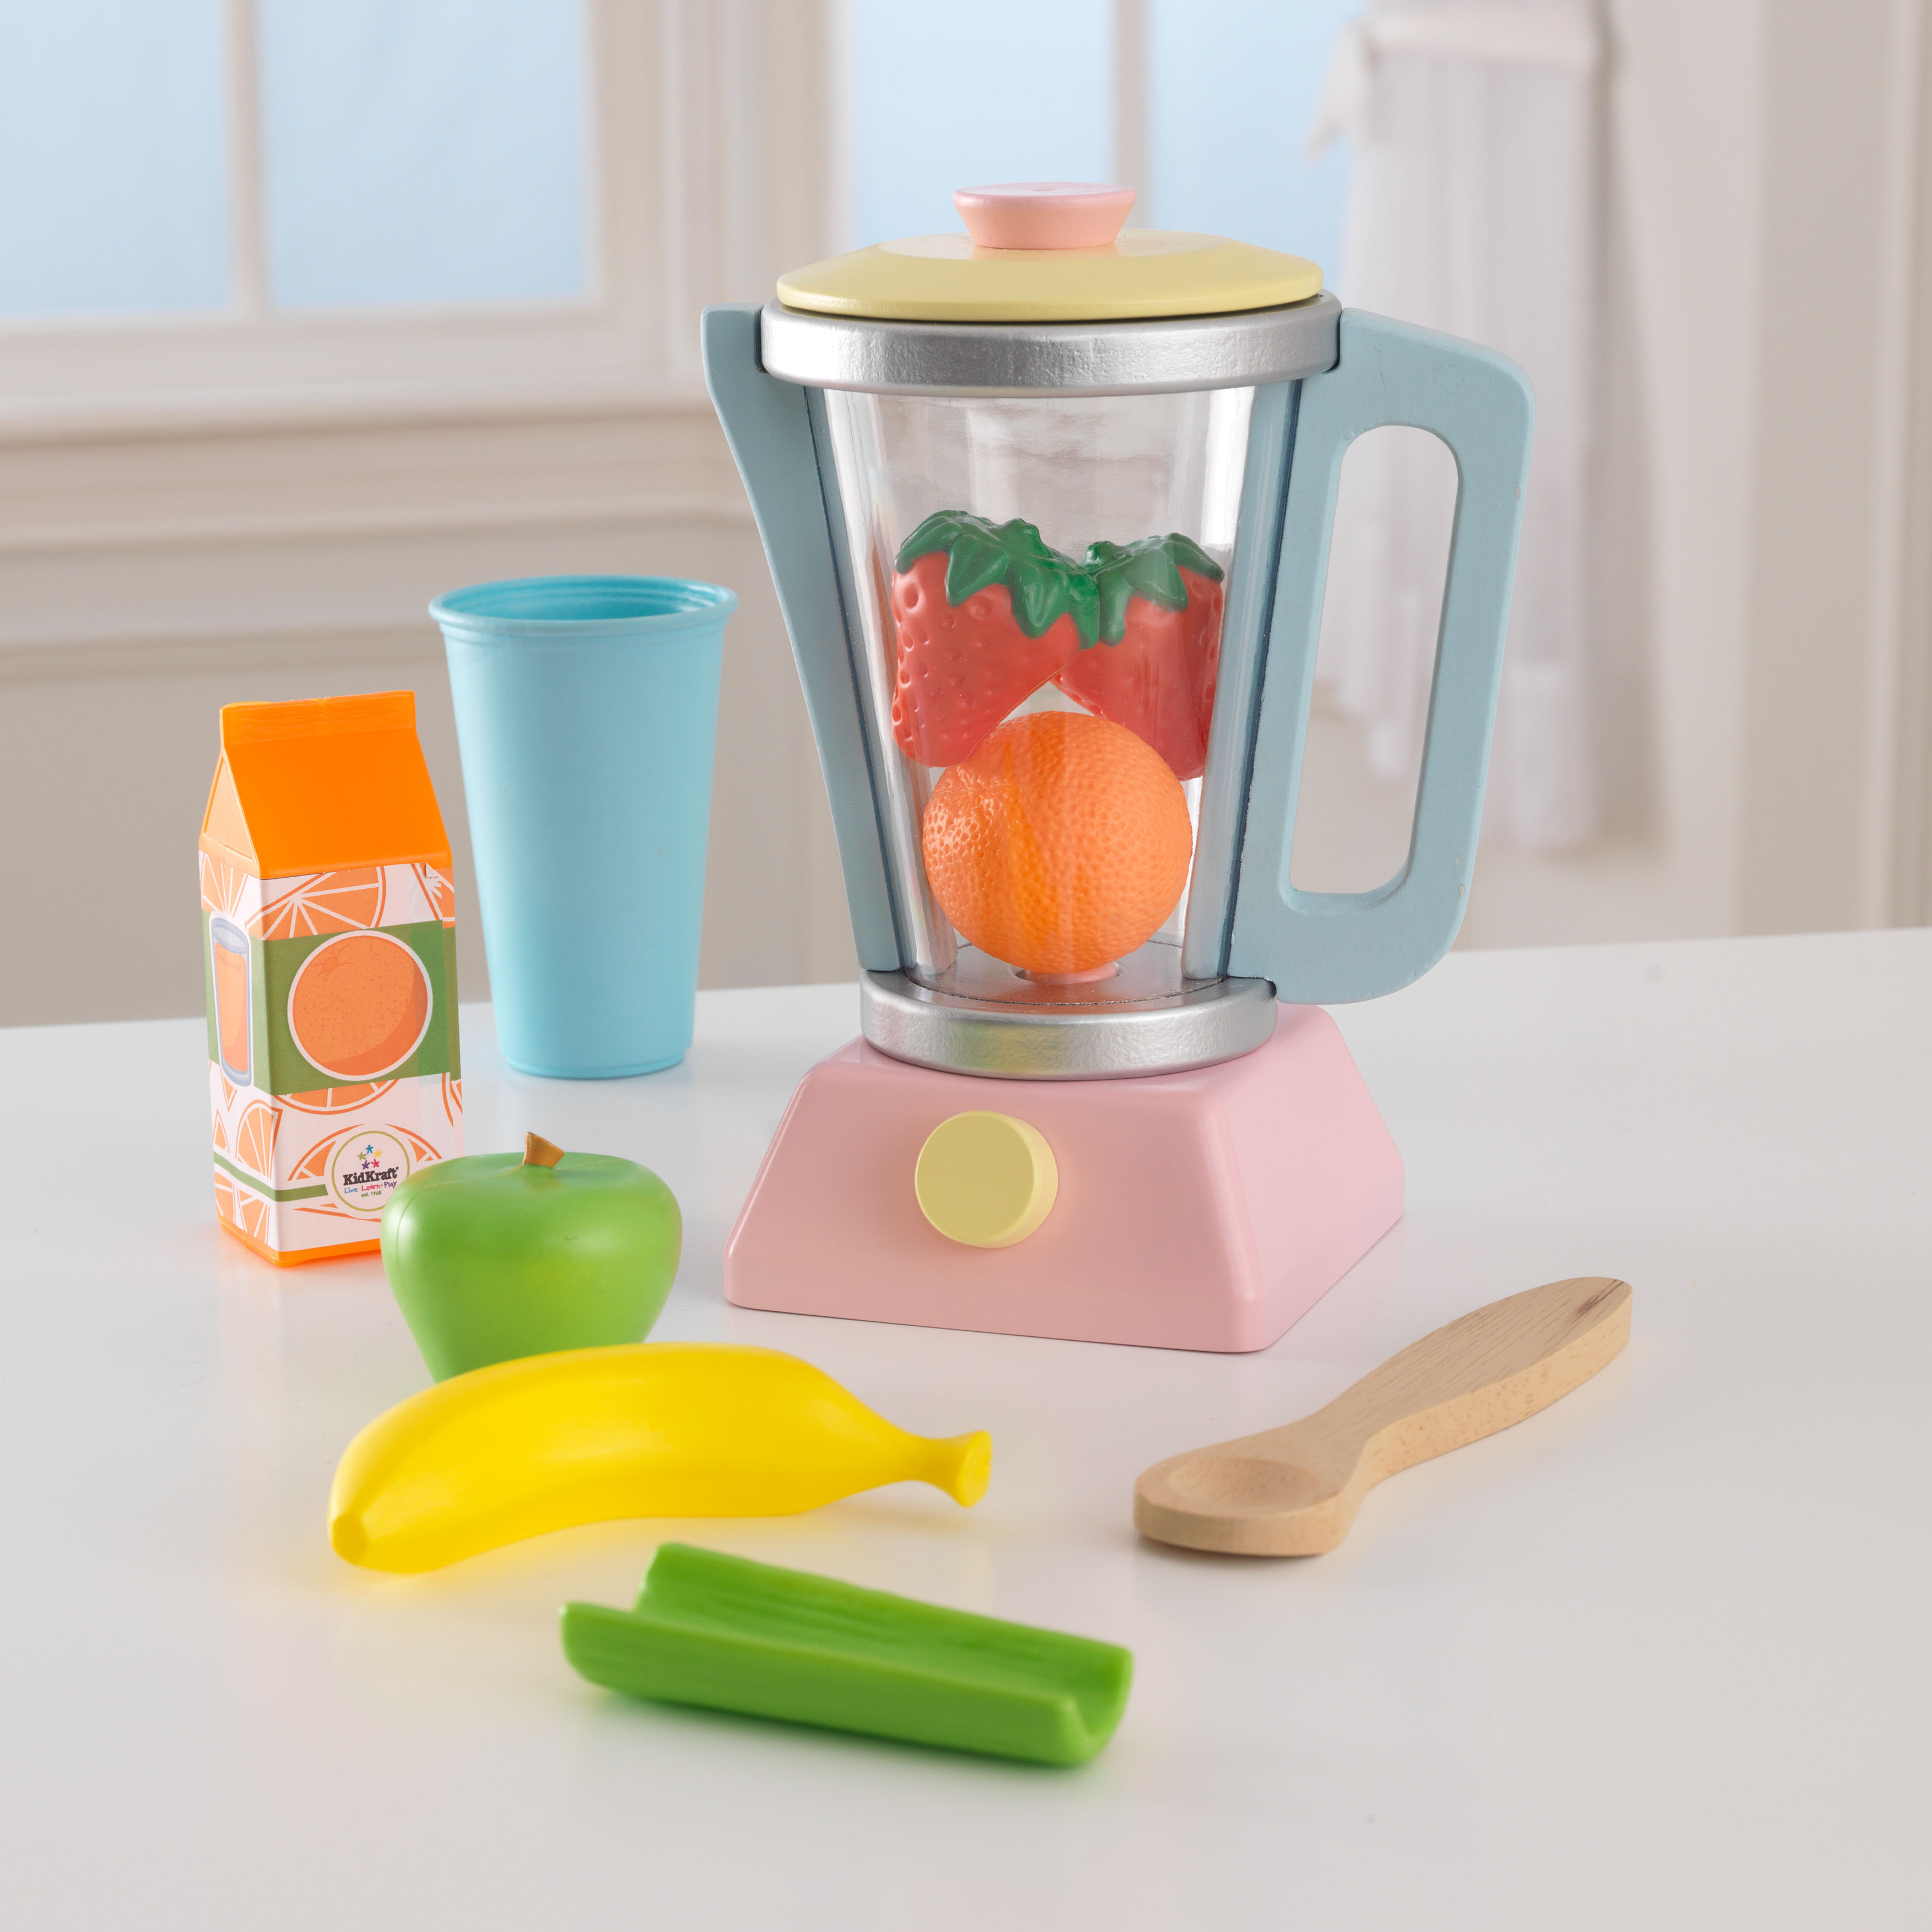 Melissa & Doug Smoothie Maker Blender Set with Play Food - 22 Pieces 